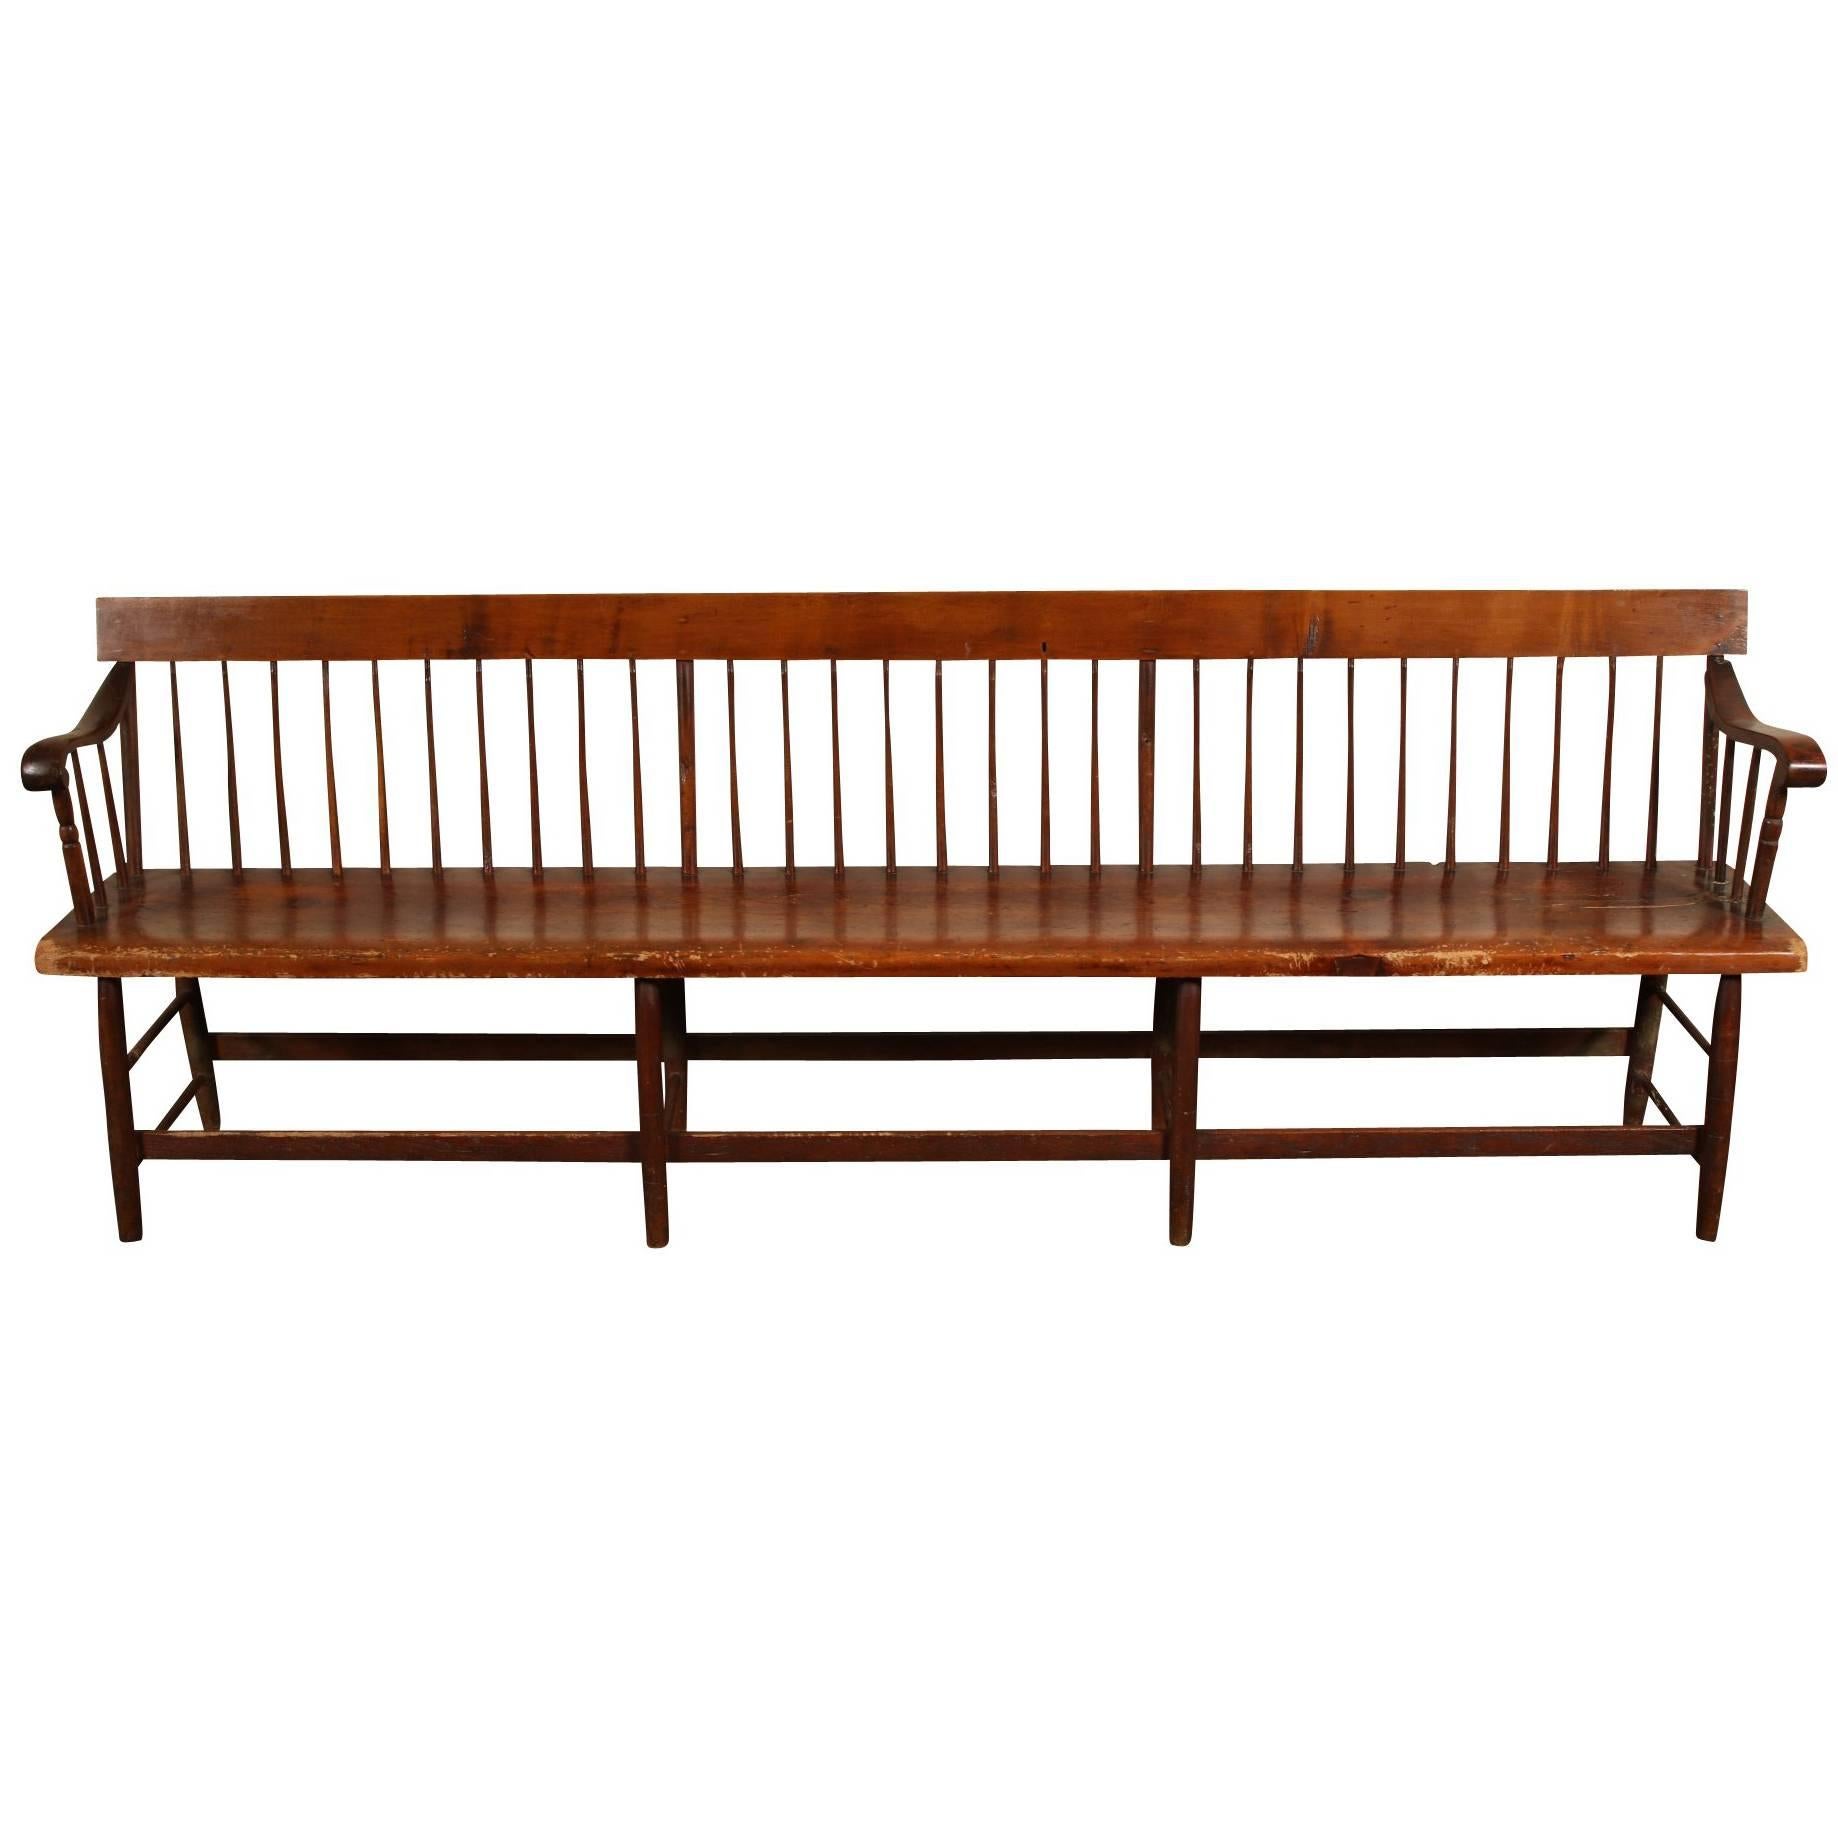 Antique Late 19th Century Railroad Bench